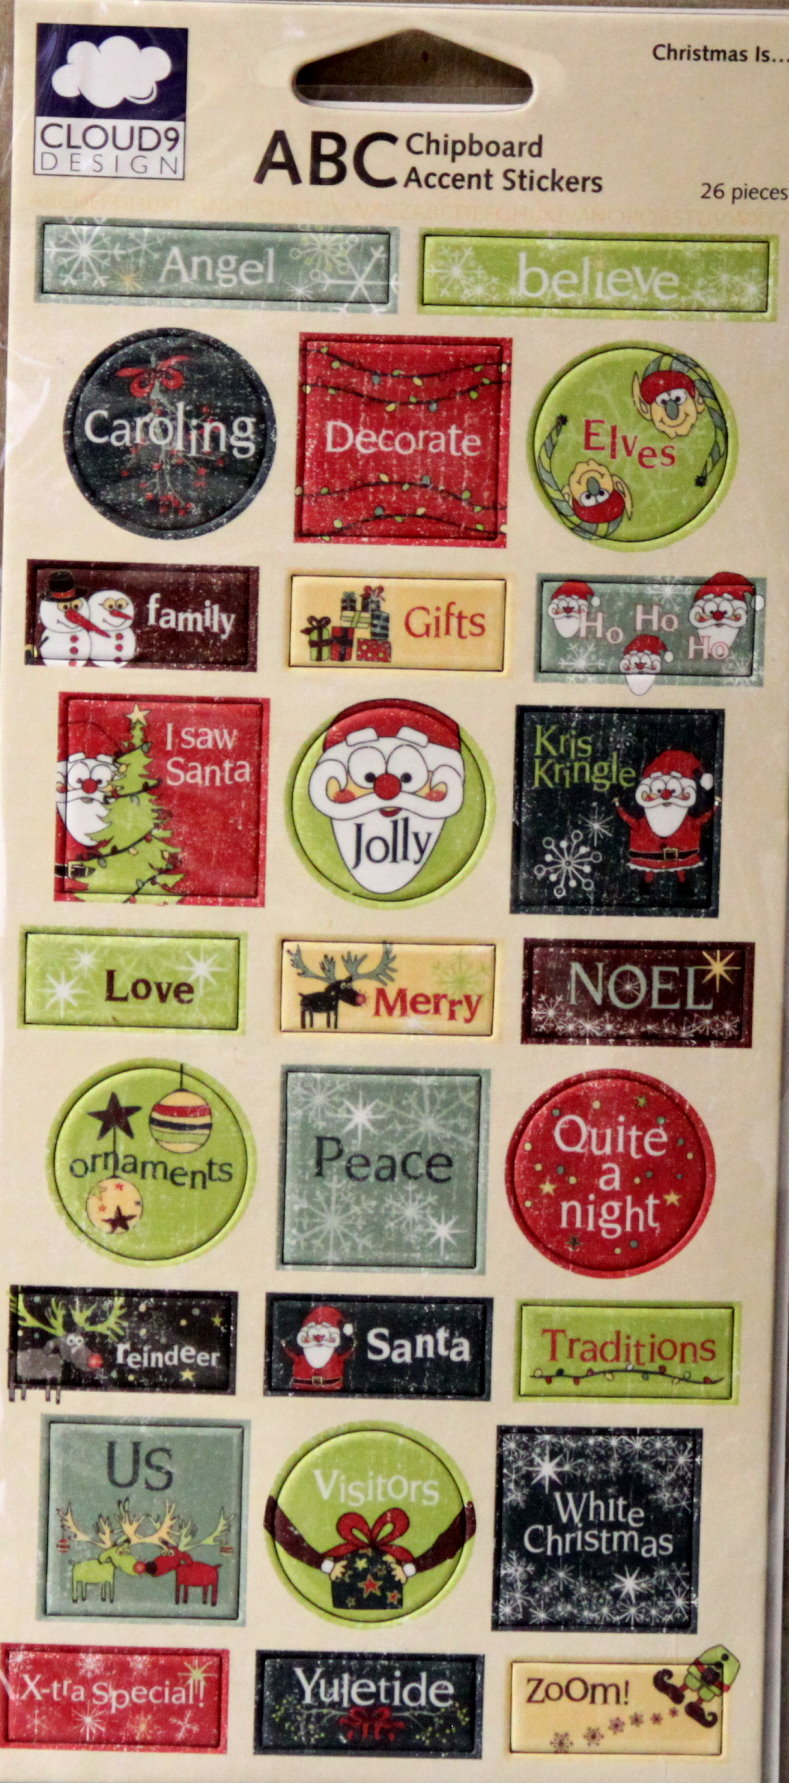 Cloud 9 Design Christmas Is... Chipboard Accent Stickers